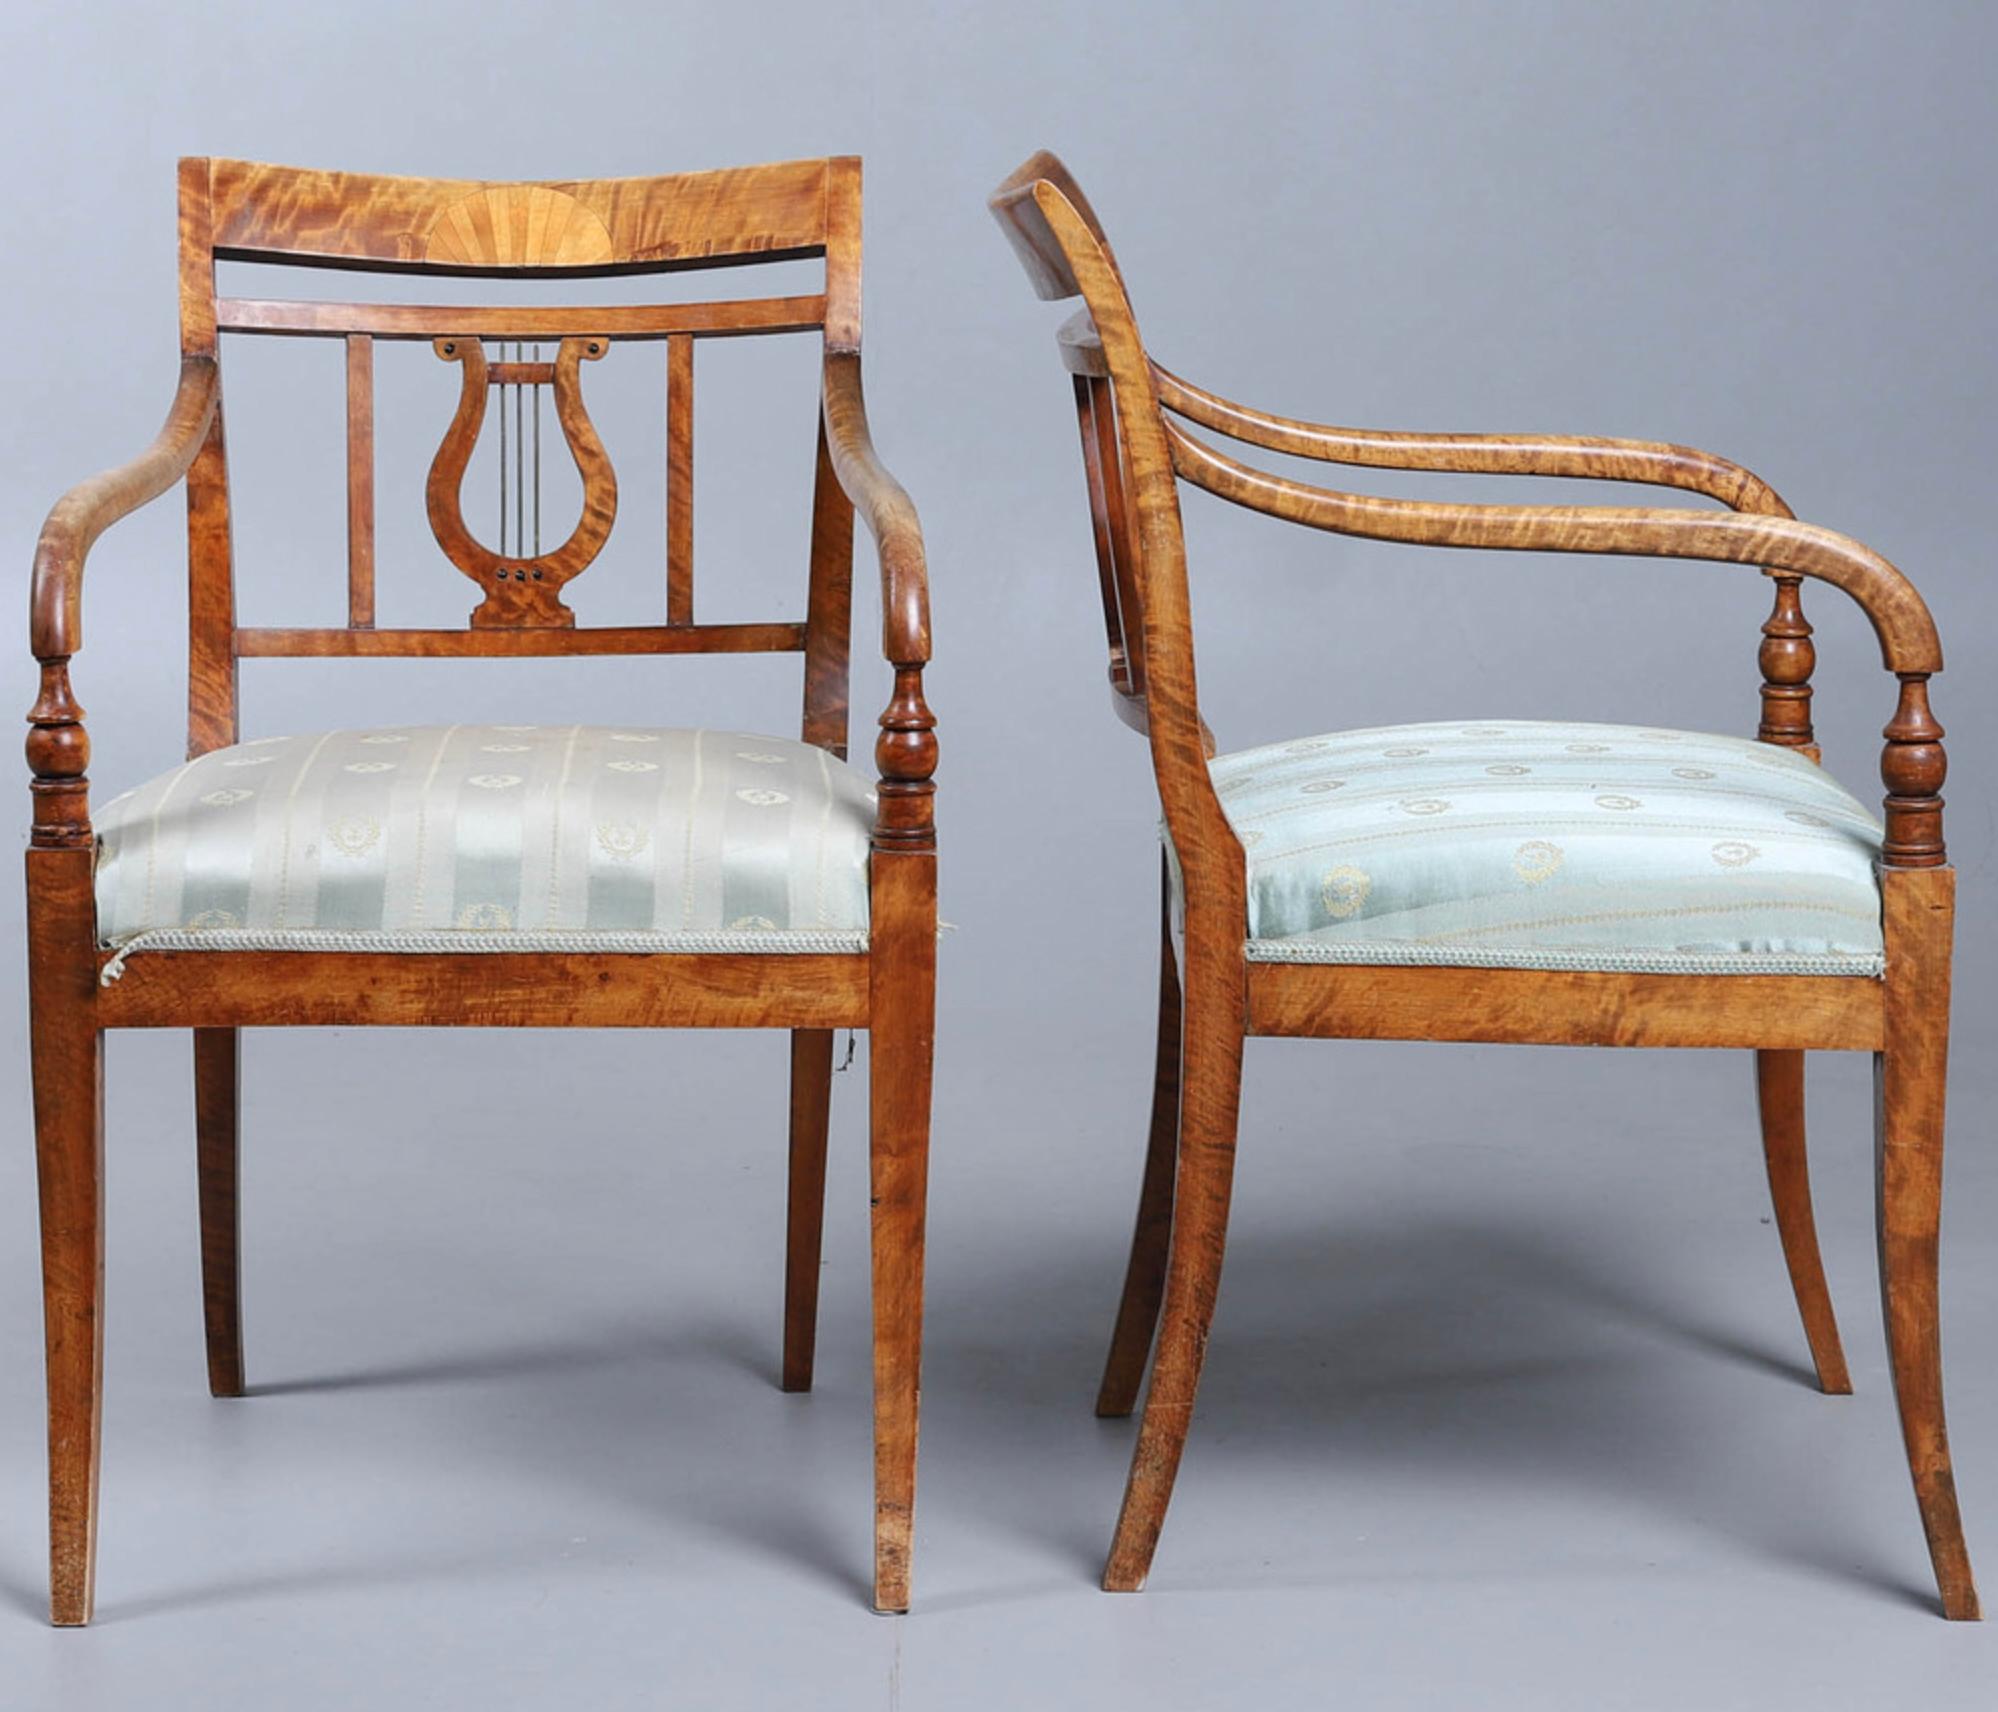 3 Swedish Biedermeier Empire antique carver chairs in highest grade quilted golden birch veneers finished in the Classic honey oak color French polish finish with rounded arms and the rarer square backs. 

The pair have a fan motif and the single